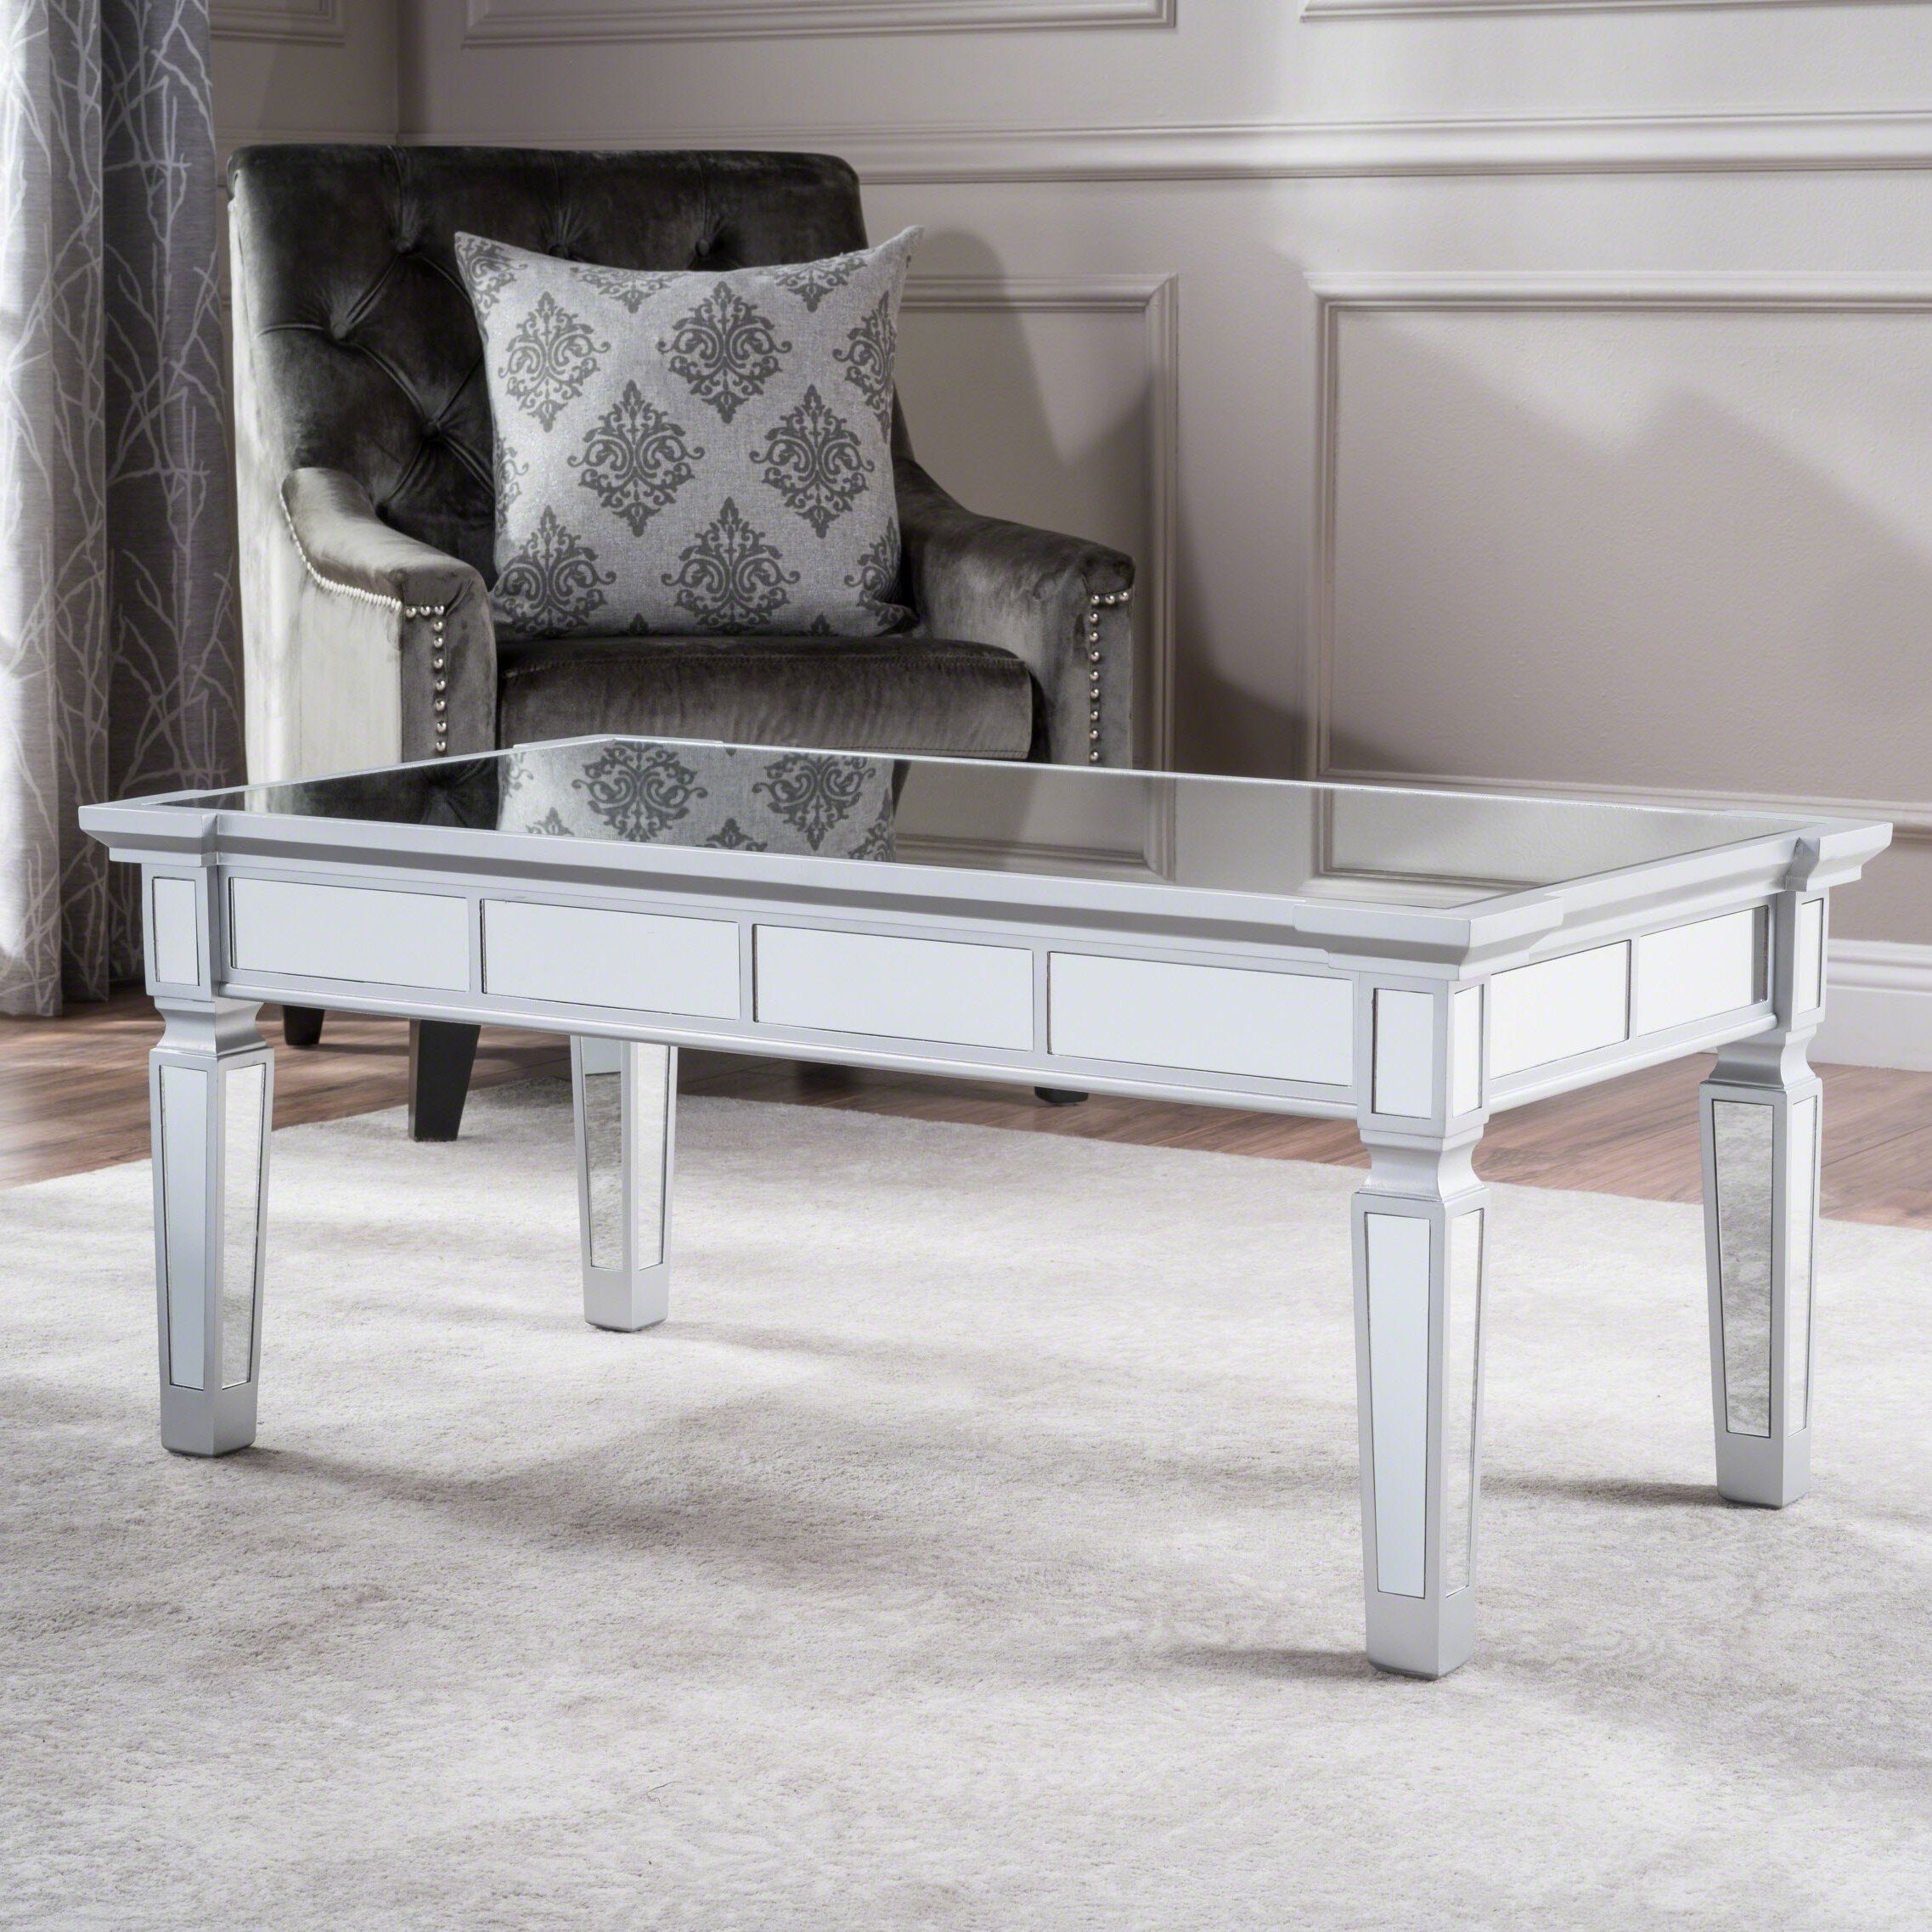 House Of Hampton® Walsall 4 Legs Coffee Table & Reviews | Wayfair With Mirrored Coffee Tables (Gallery 19 of 20)